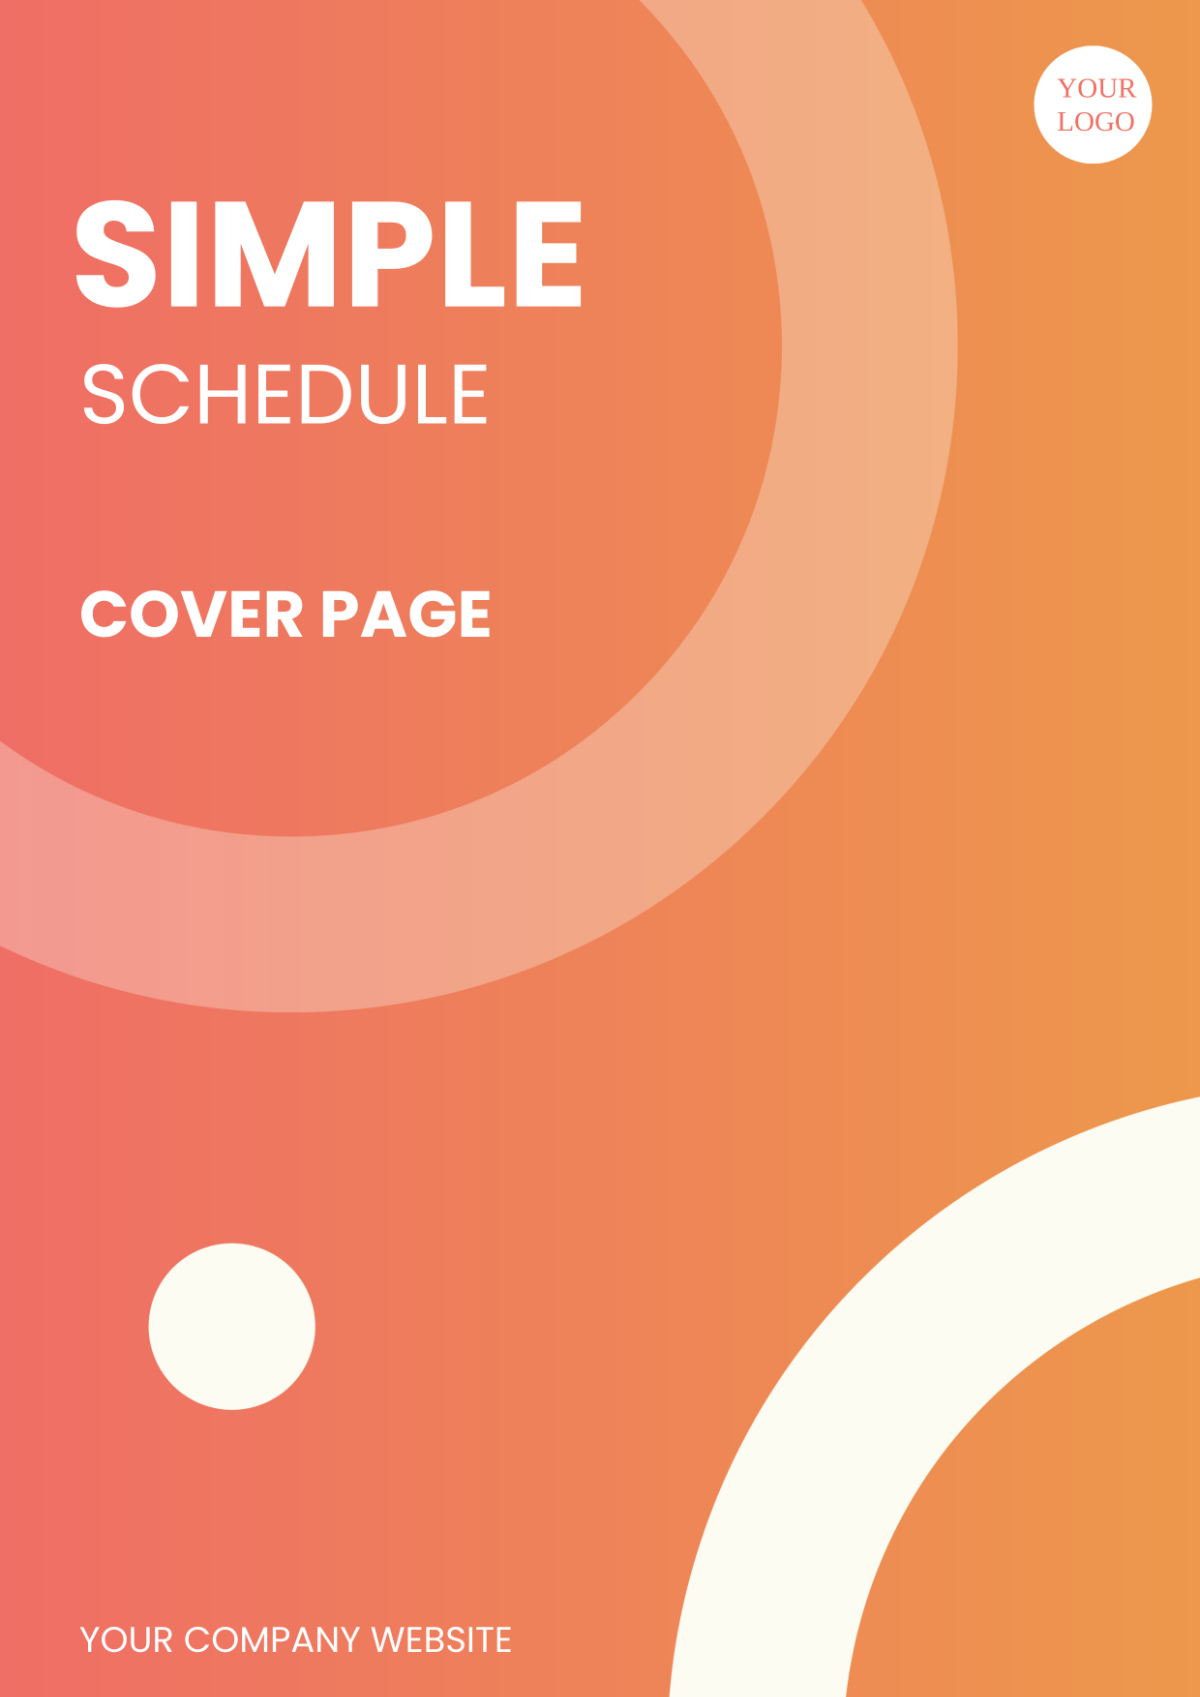 Simple Schedule Cover Page